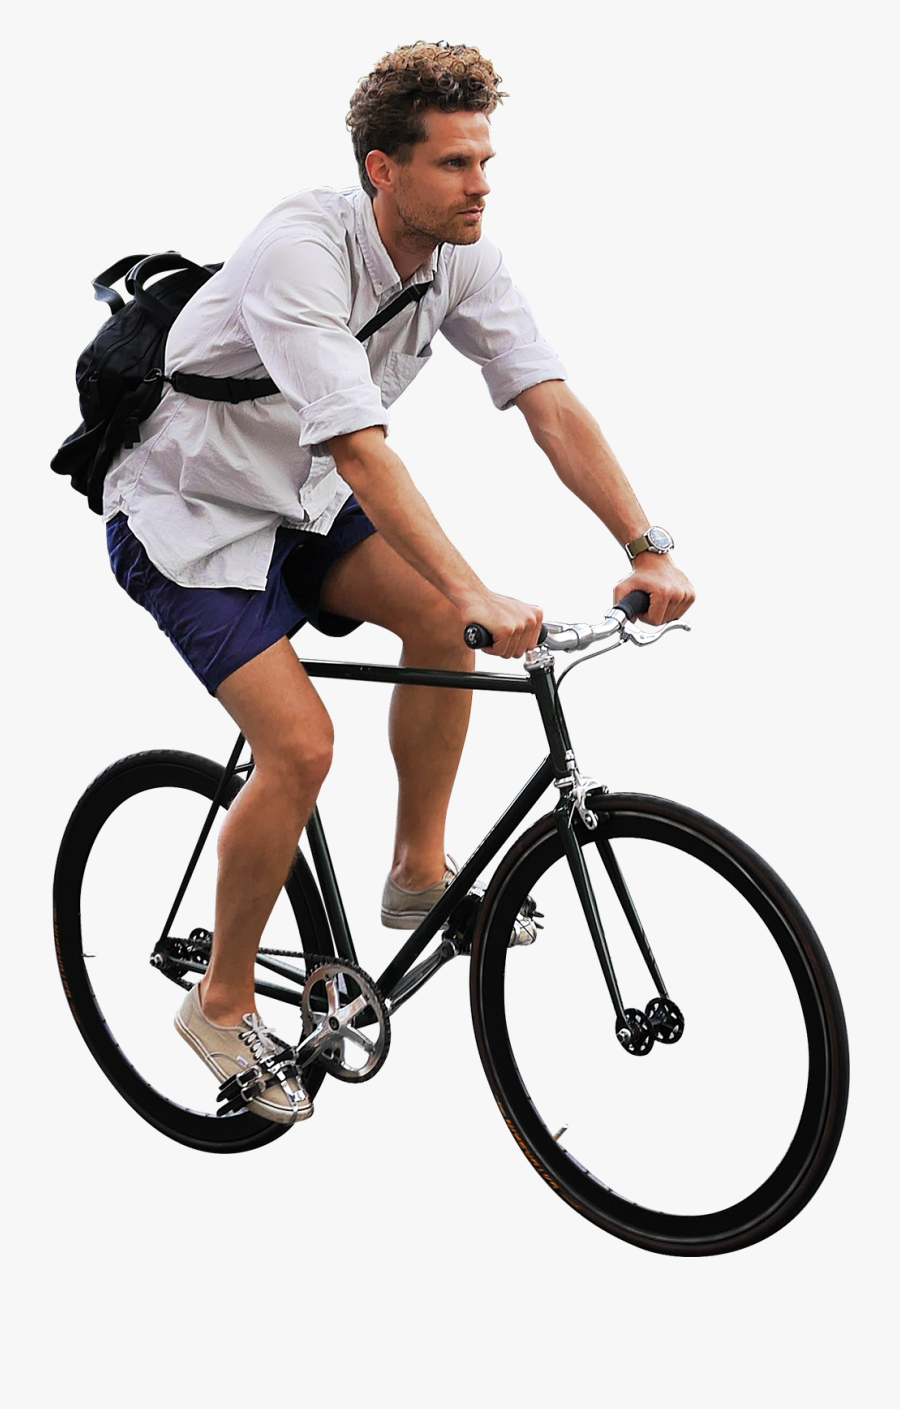 Cycling Png Hd - People On Bike Png, Transparent Clipart